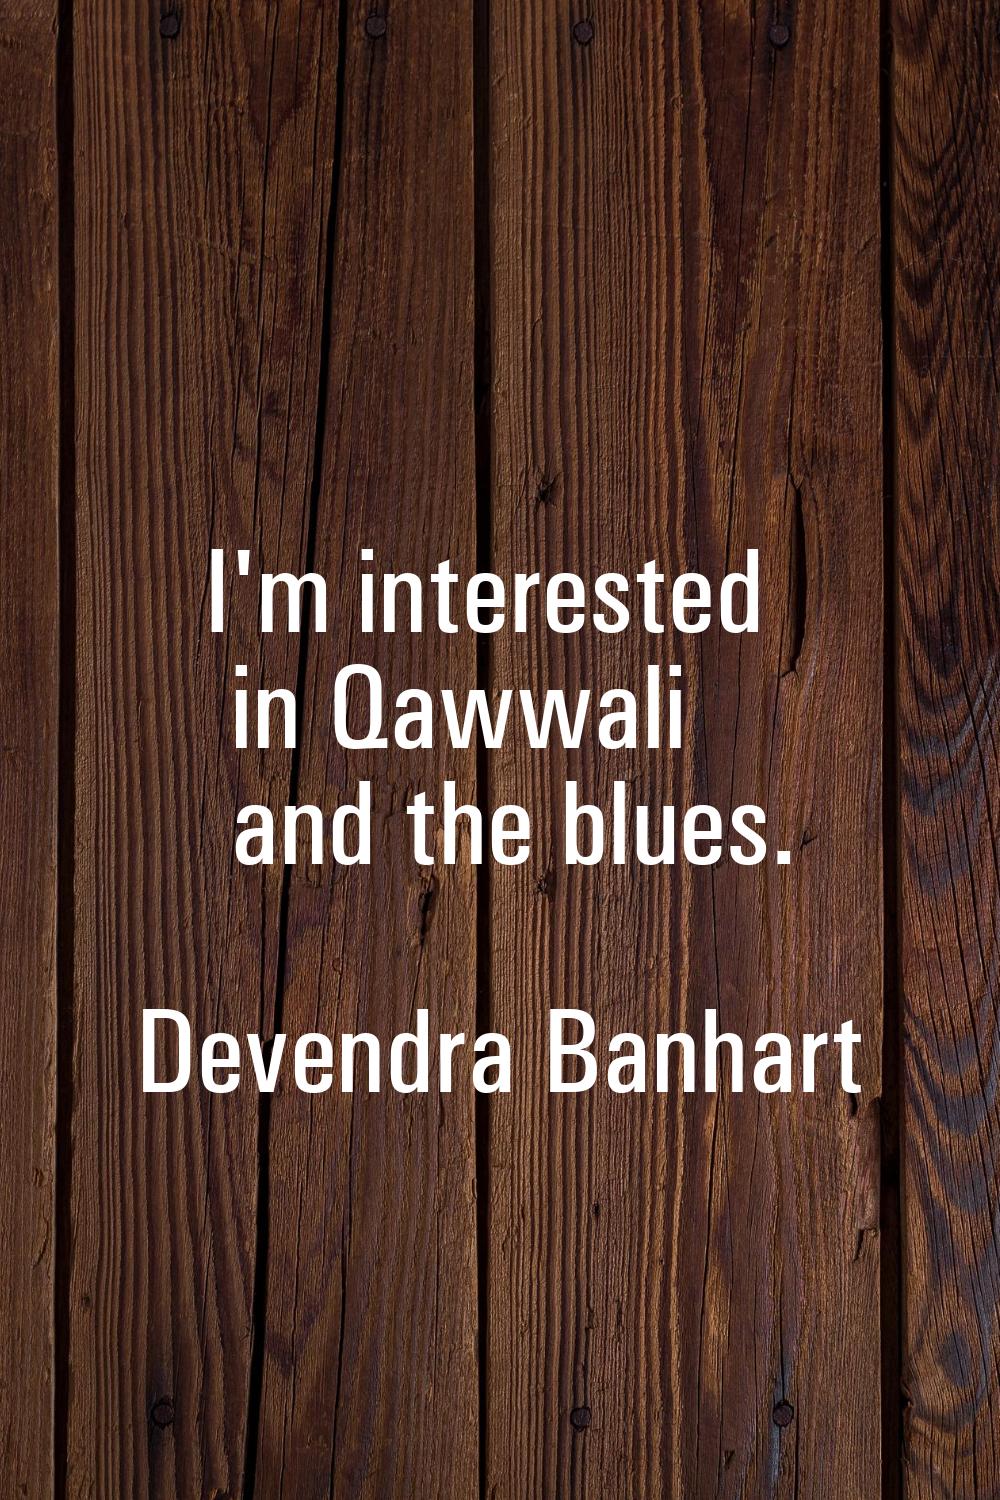 I'm interested in Qawwali and the blues.